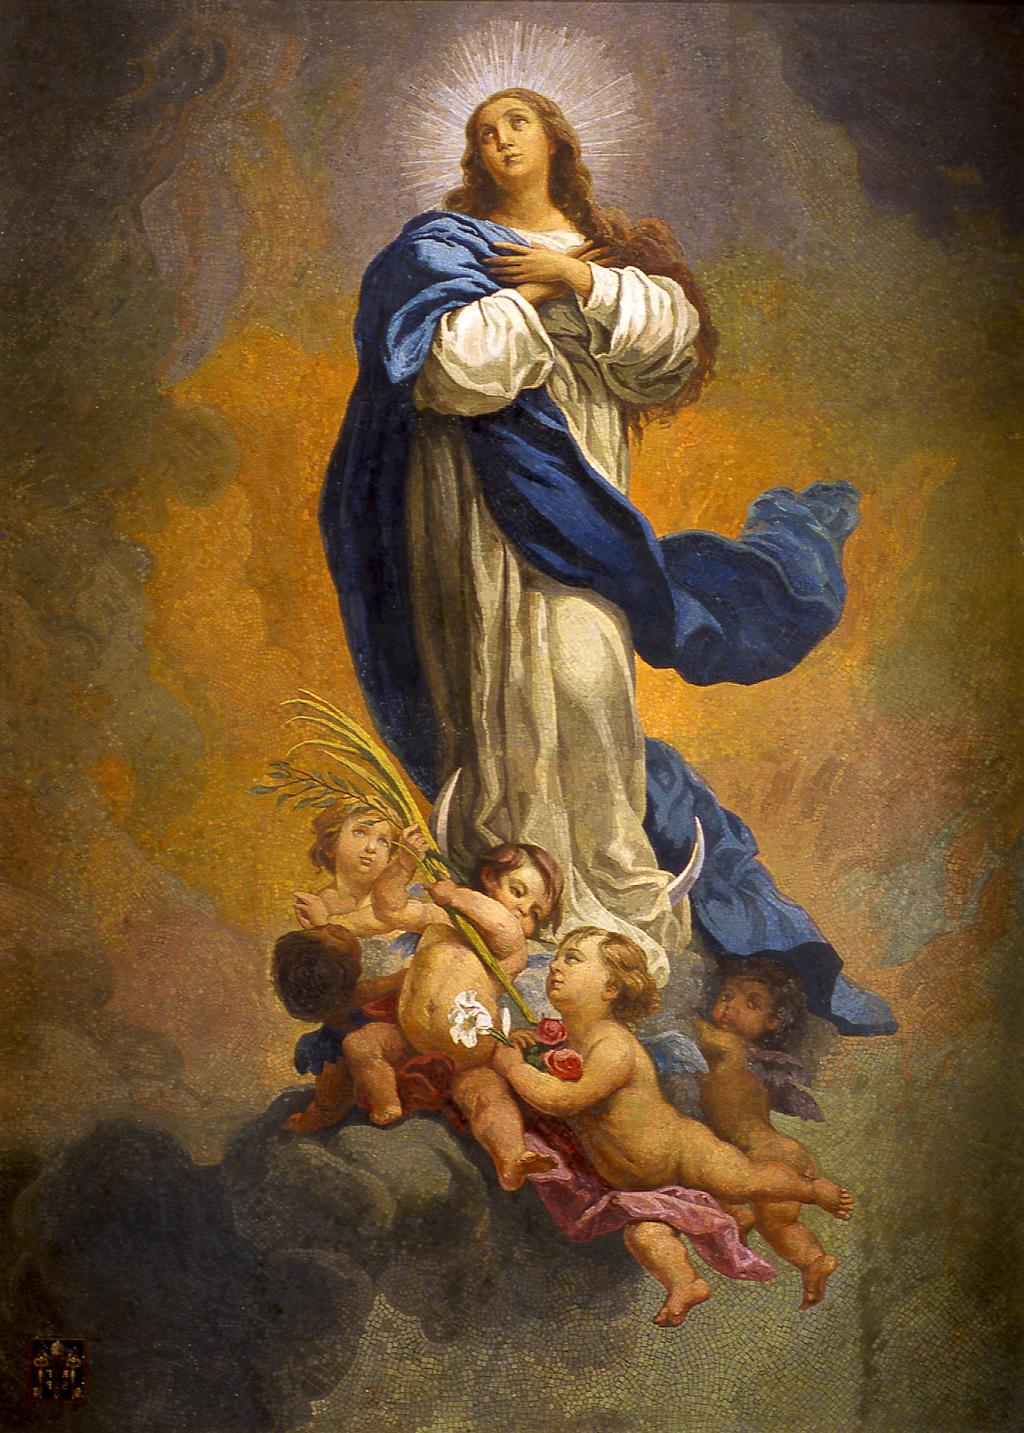 Novena in honor of the Immaculate Conception